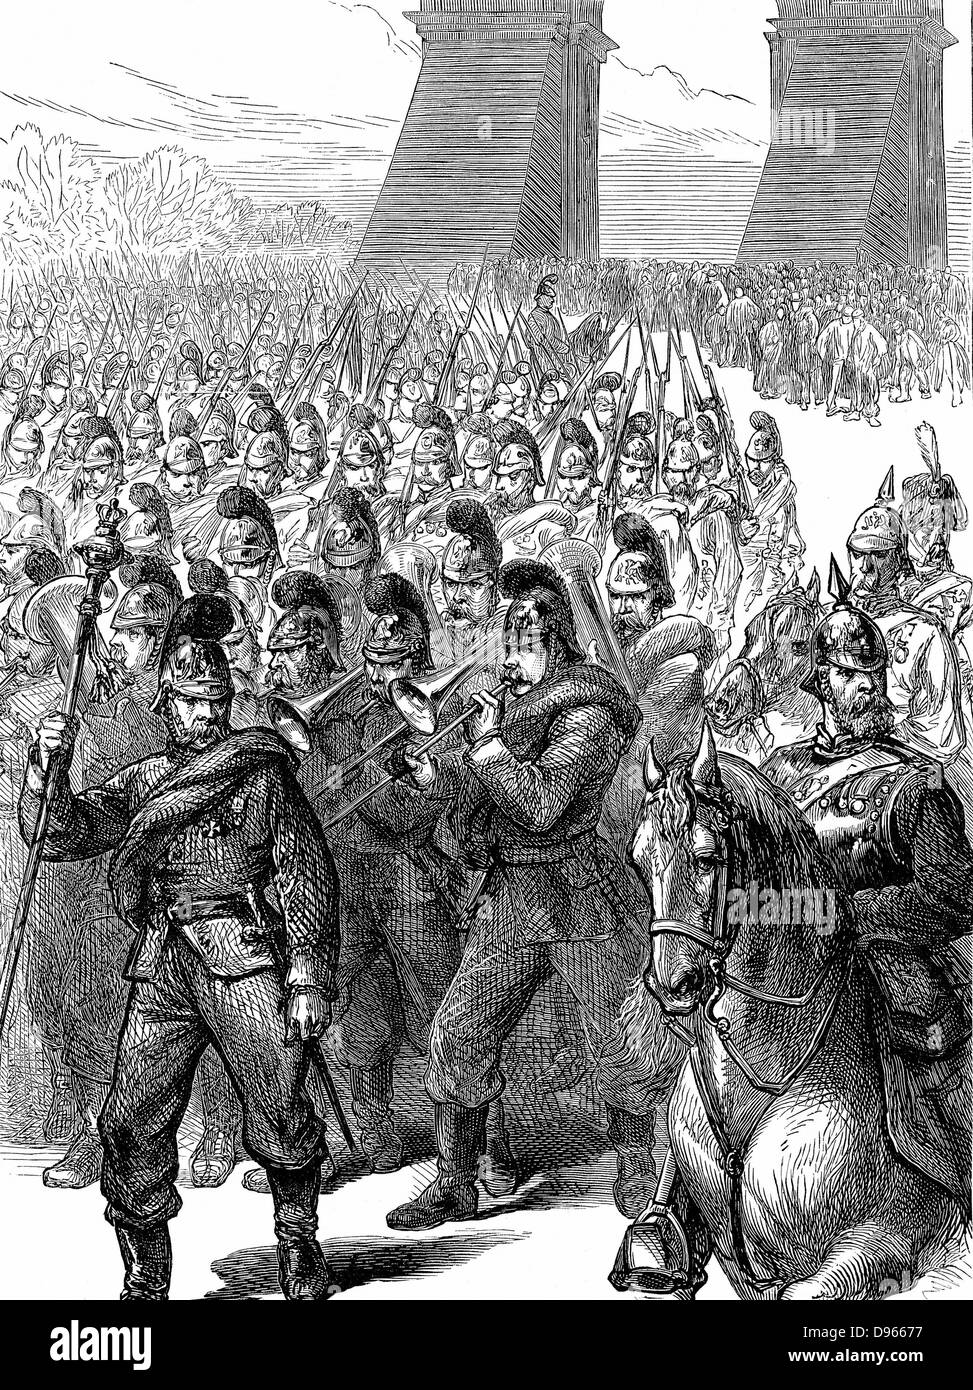 Franco-Prussian War 1870-1871: German troops marching into Paris. Wood engraving c1880 Stock Photo